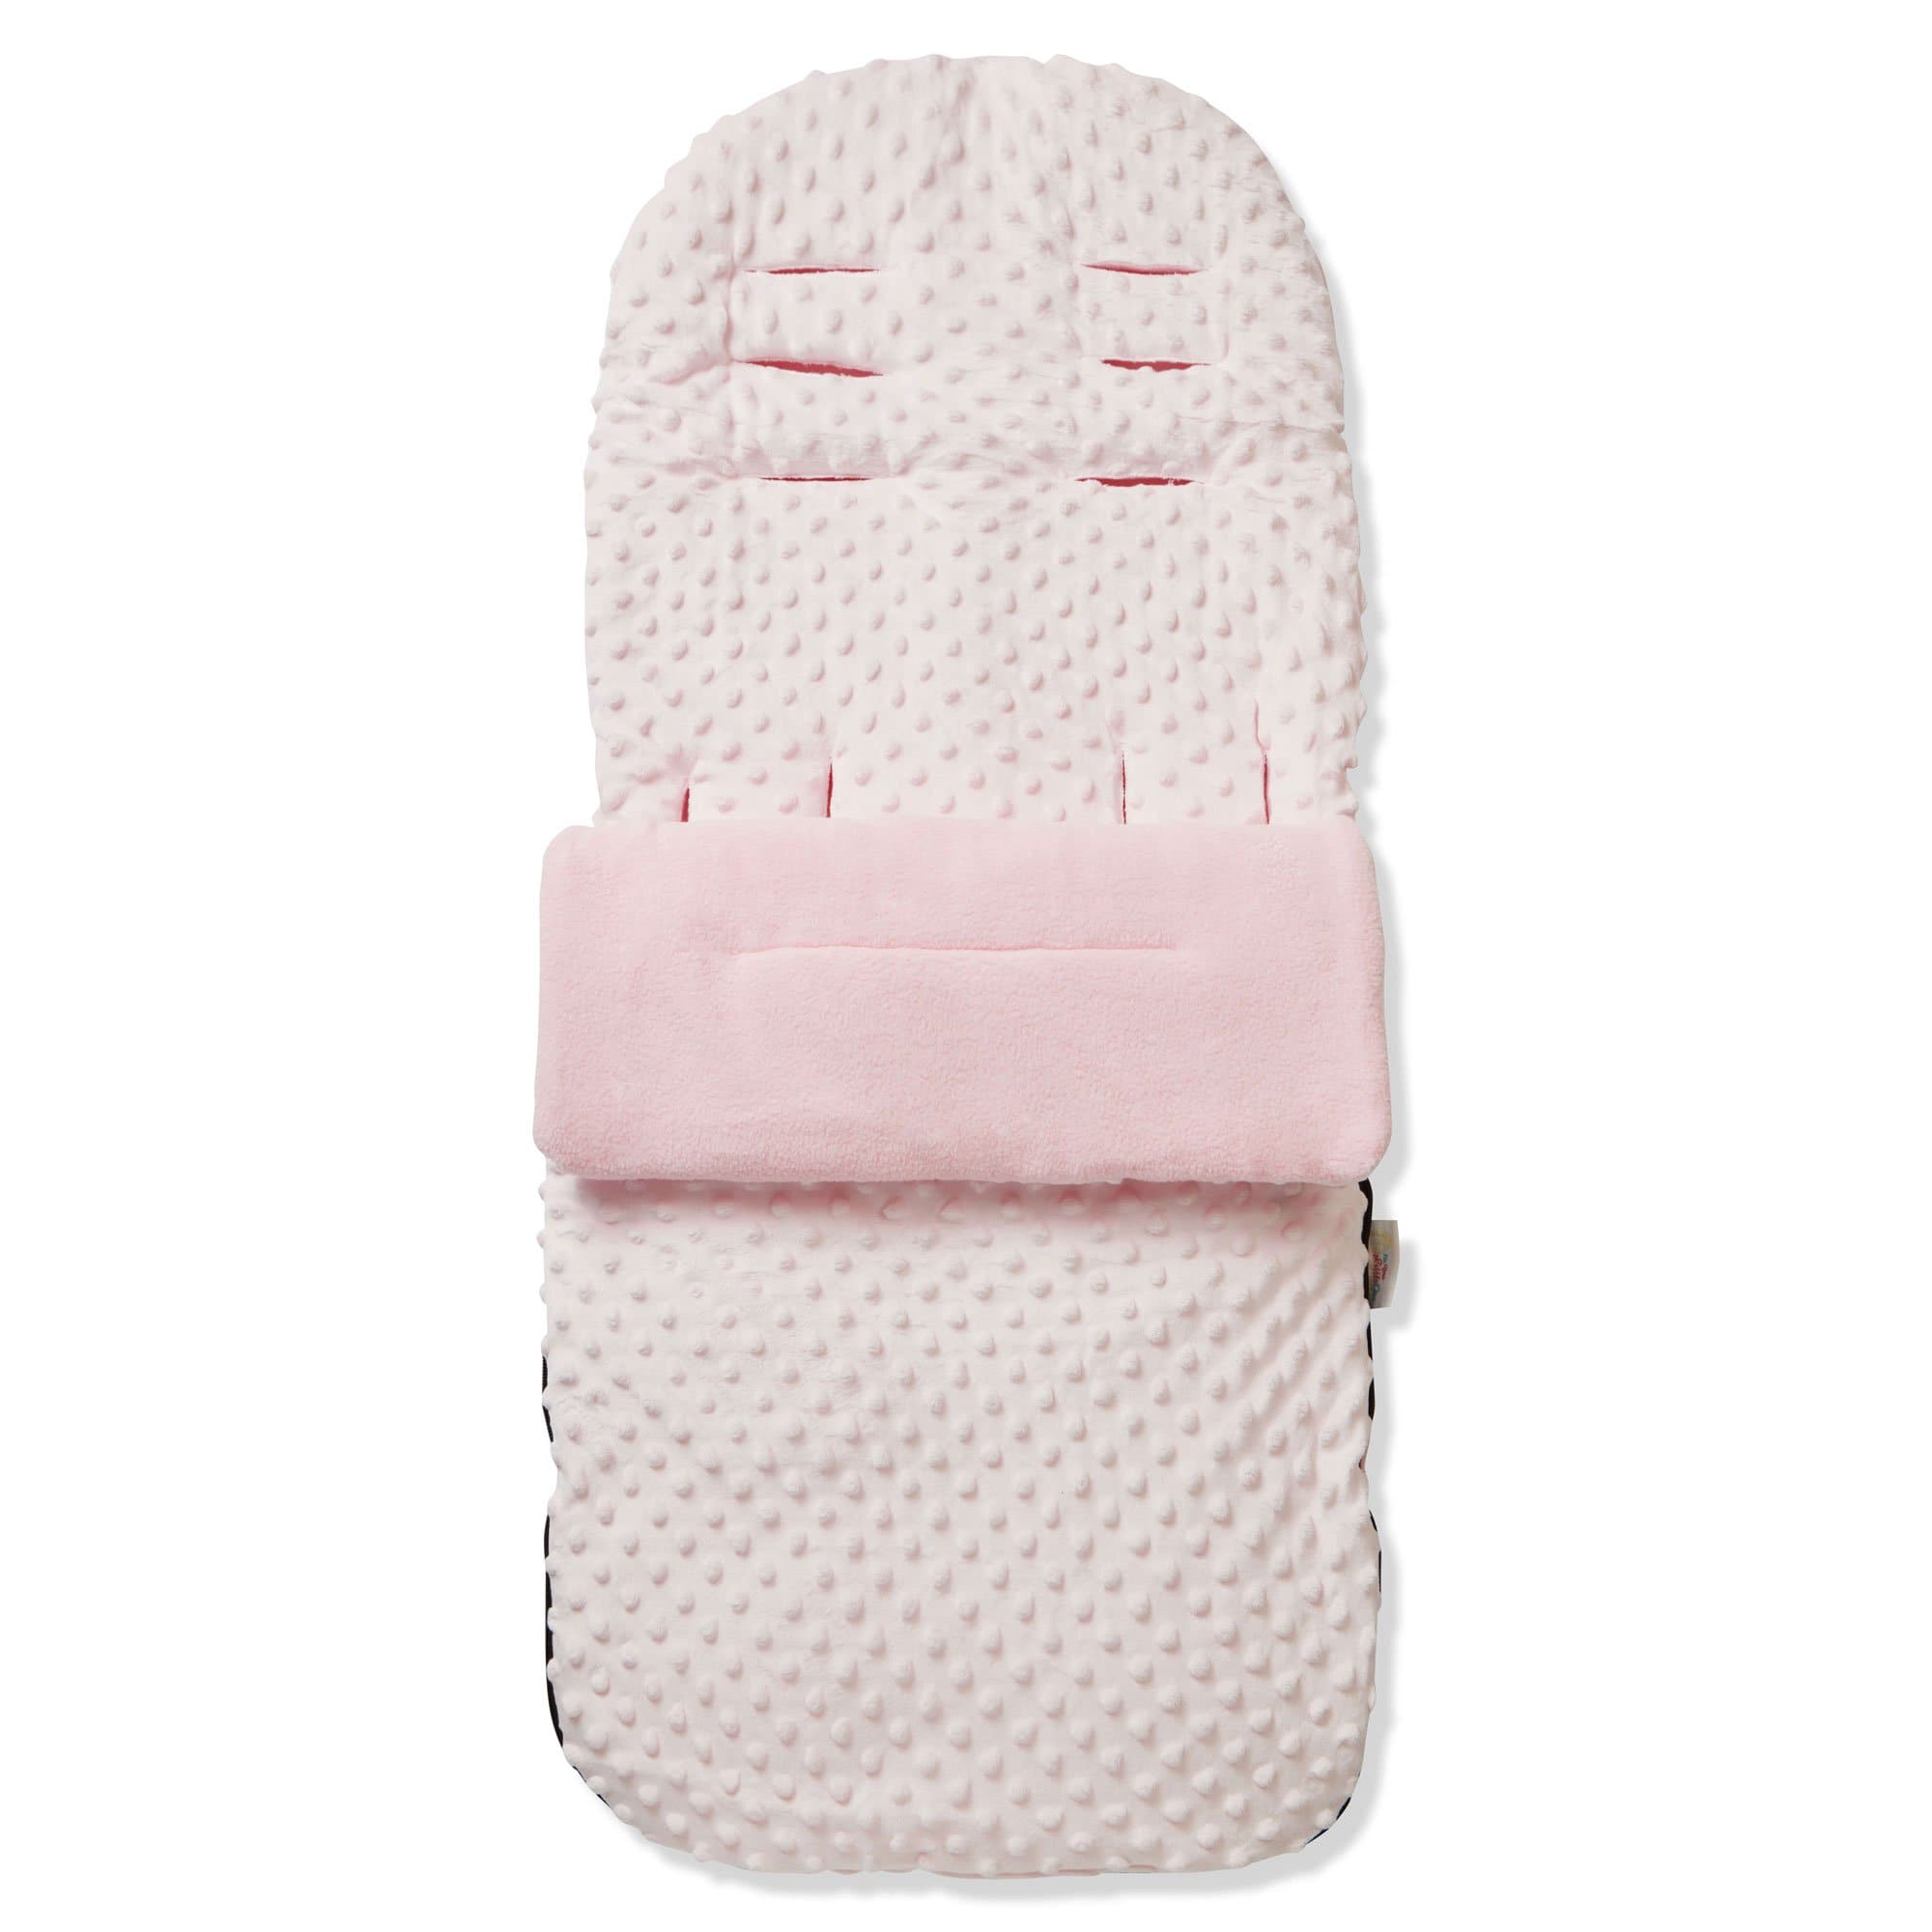 Dimple Footmuff / Cosy Toes Compatible with Mothercare - Pink / Fits All Models | For Your Little One